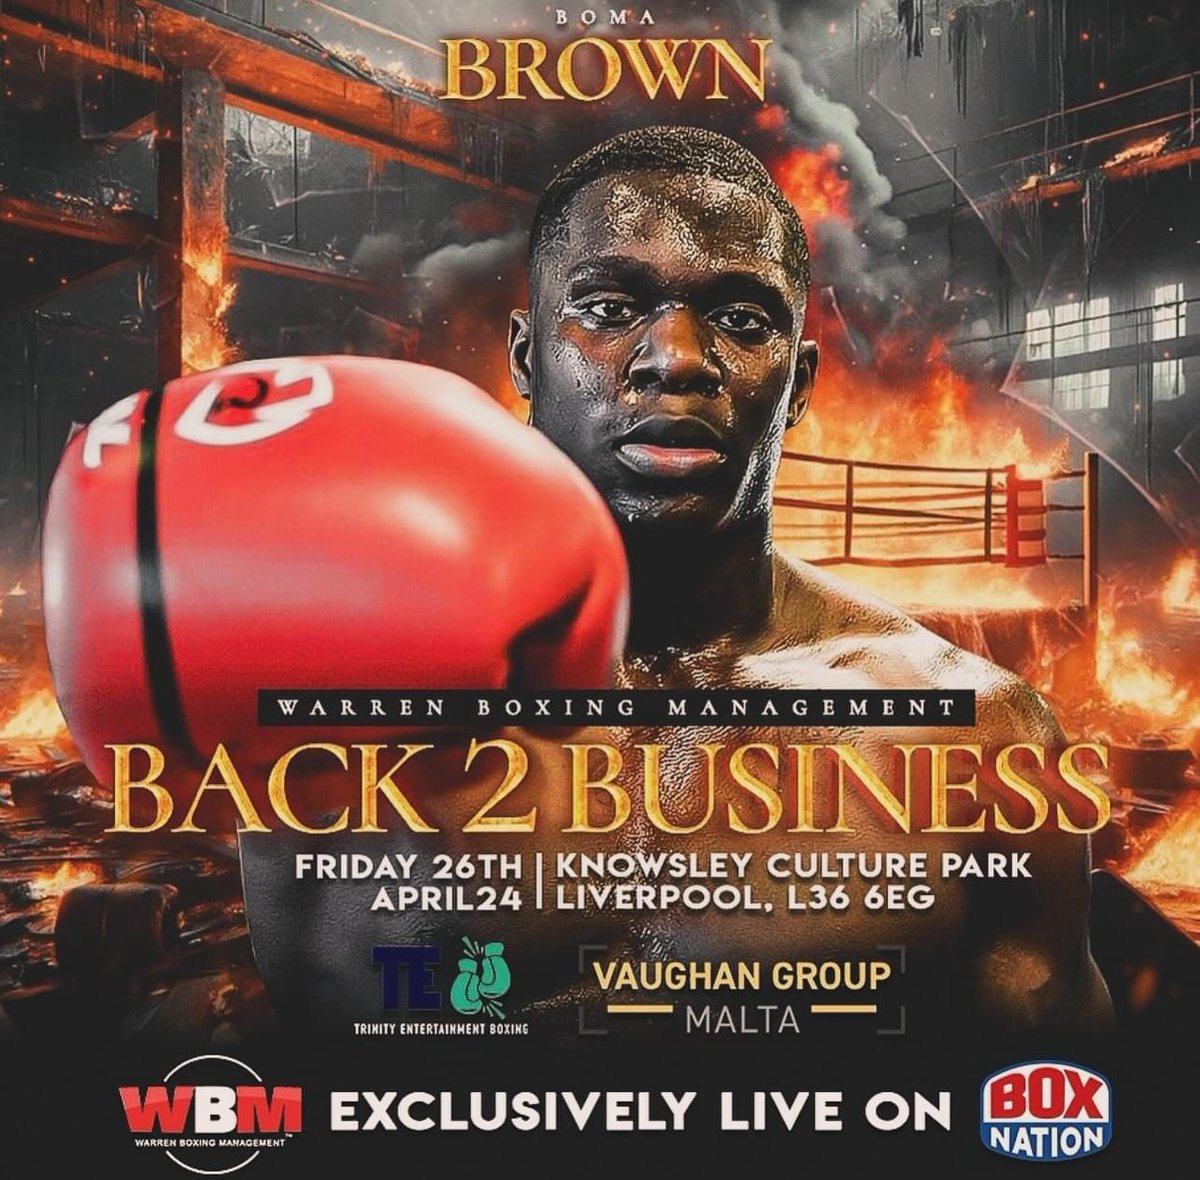 Warrington-based fighter @BomaBomberBrown returns to the ring tonight, live on @BoxNation_TV 🥊📺 The Yellows are behind you, Boma! 🙌 📸 @sean_walsh153